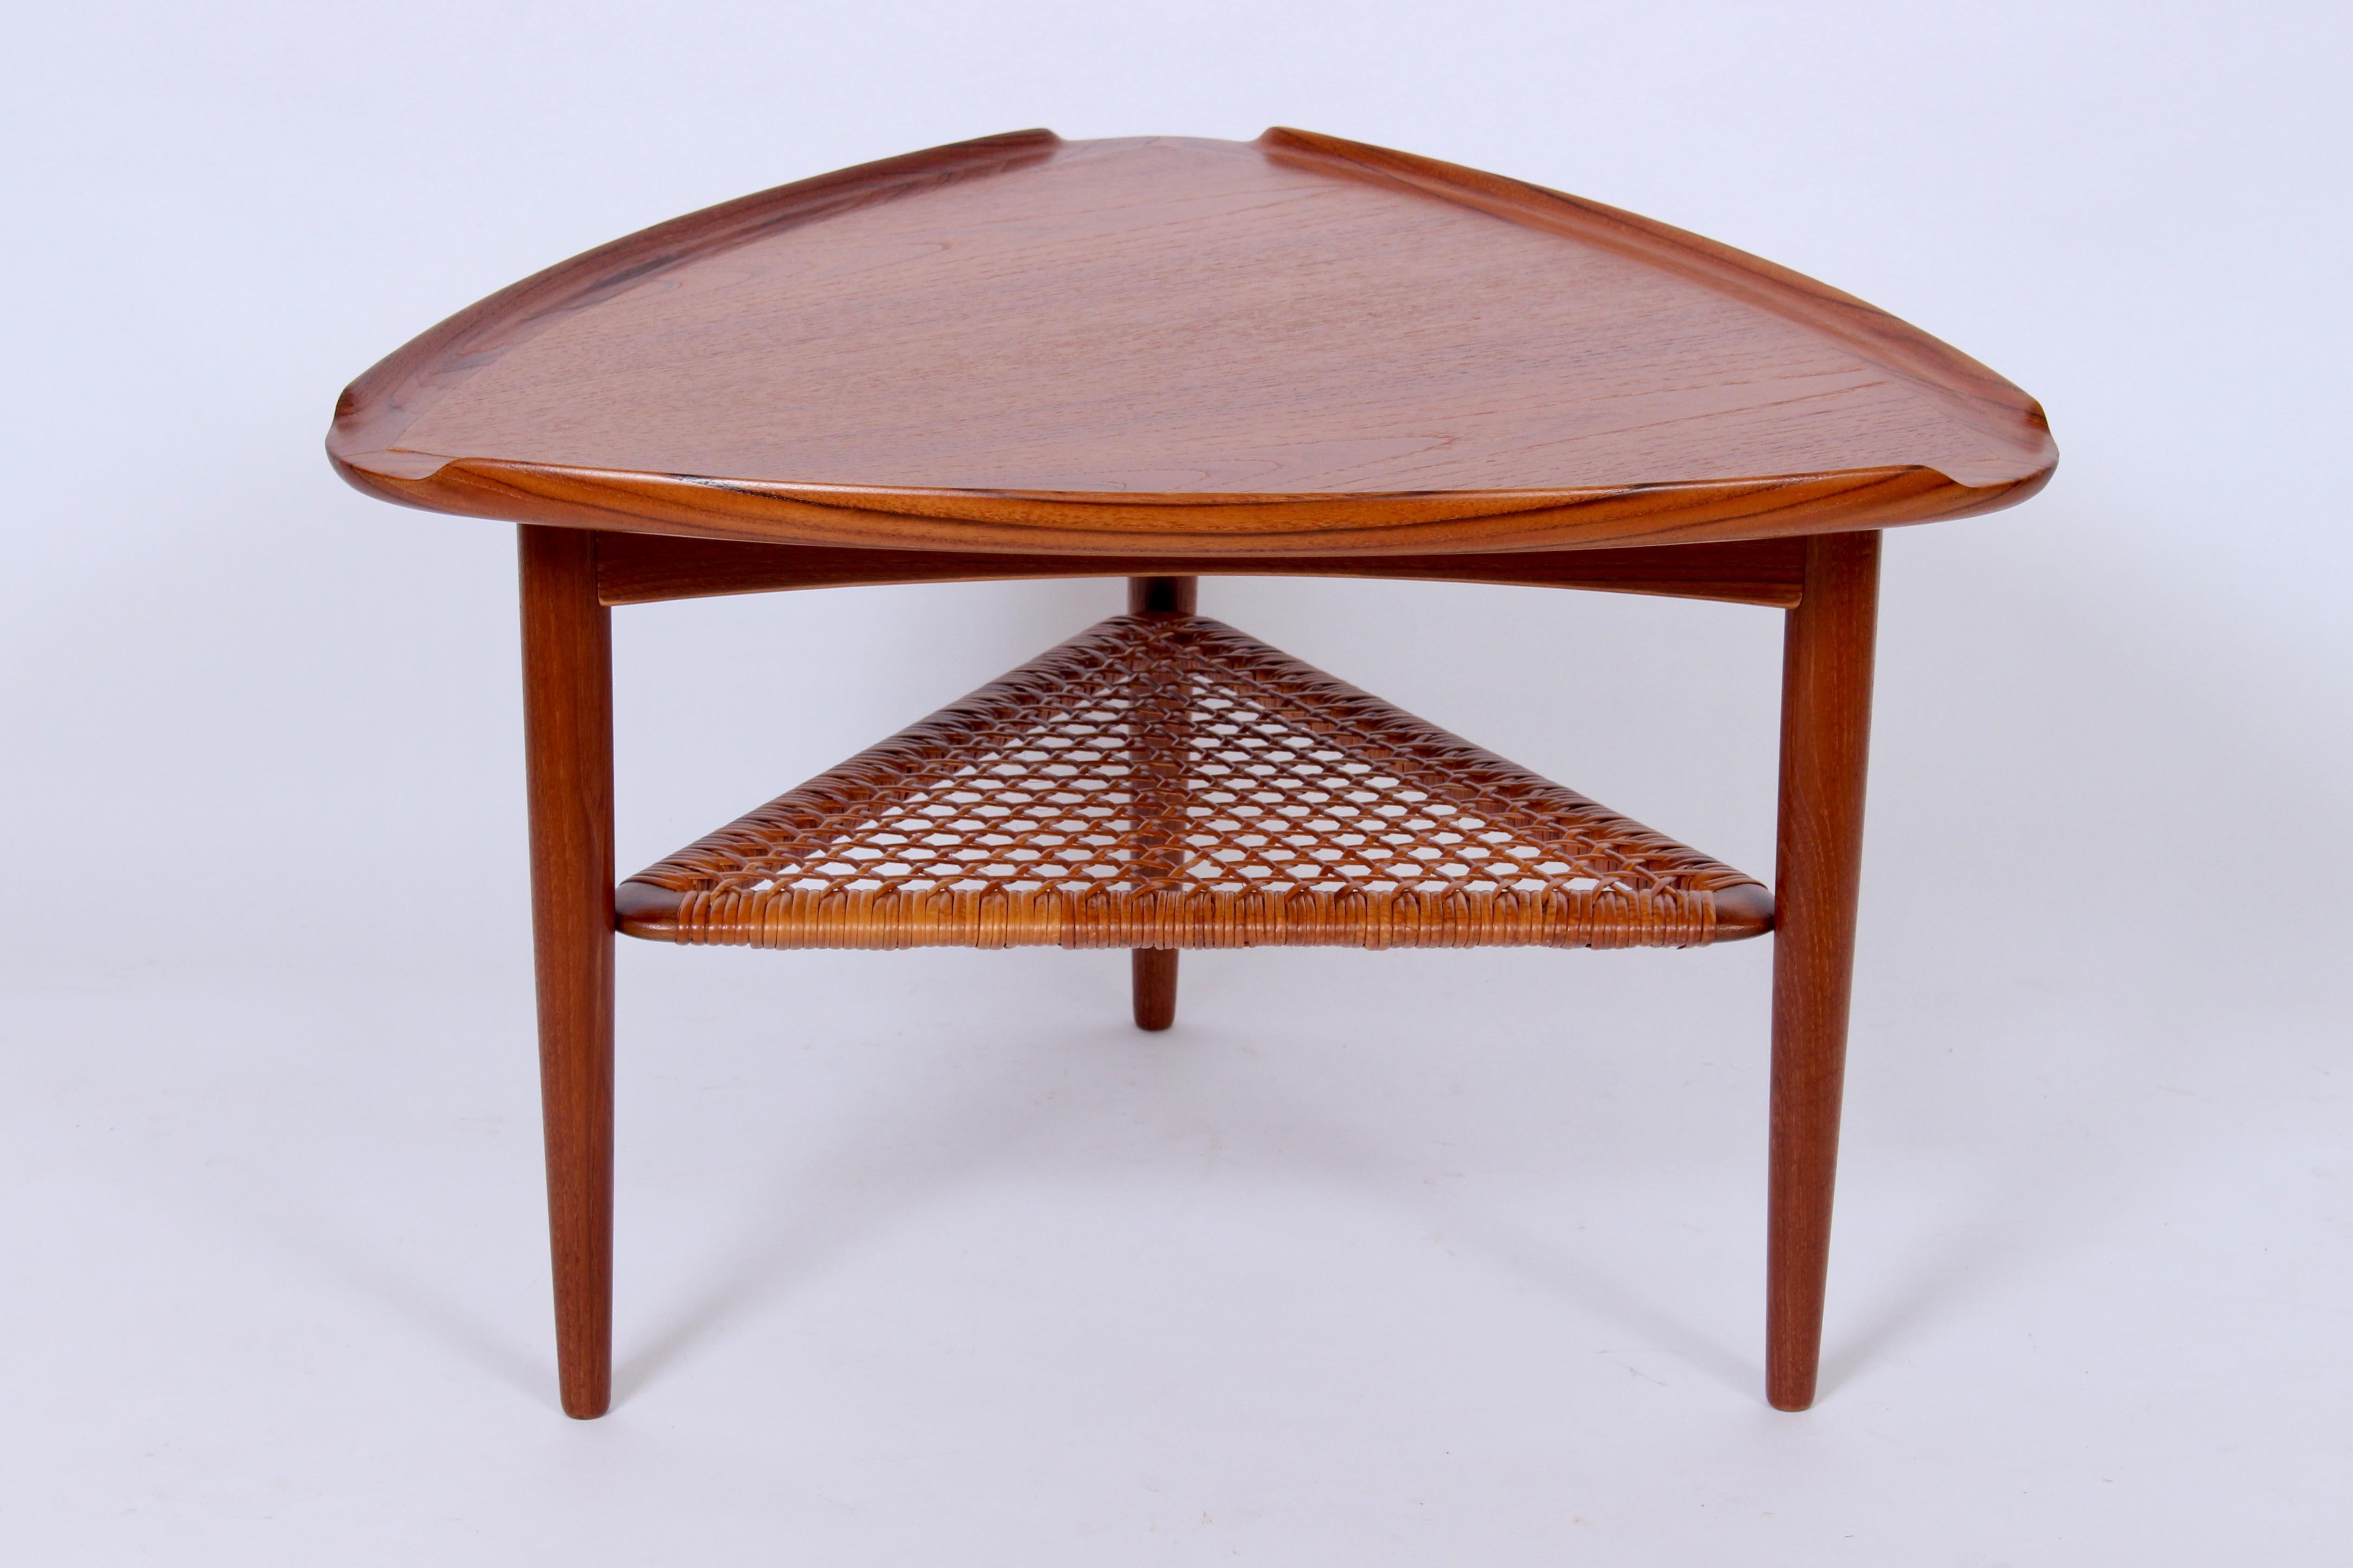 Poul Jensen for Selig Teak Tripod Table with Woven Cane Shelf, 1960's For Sale 8